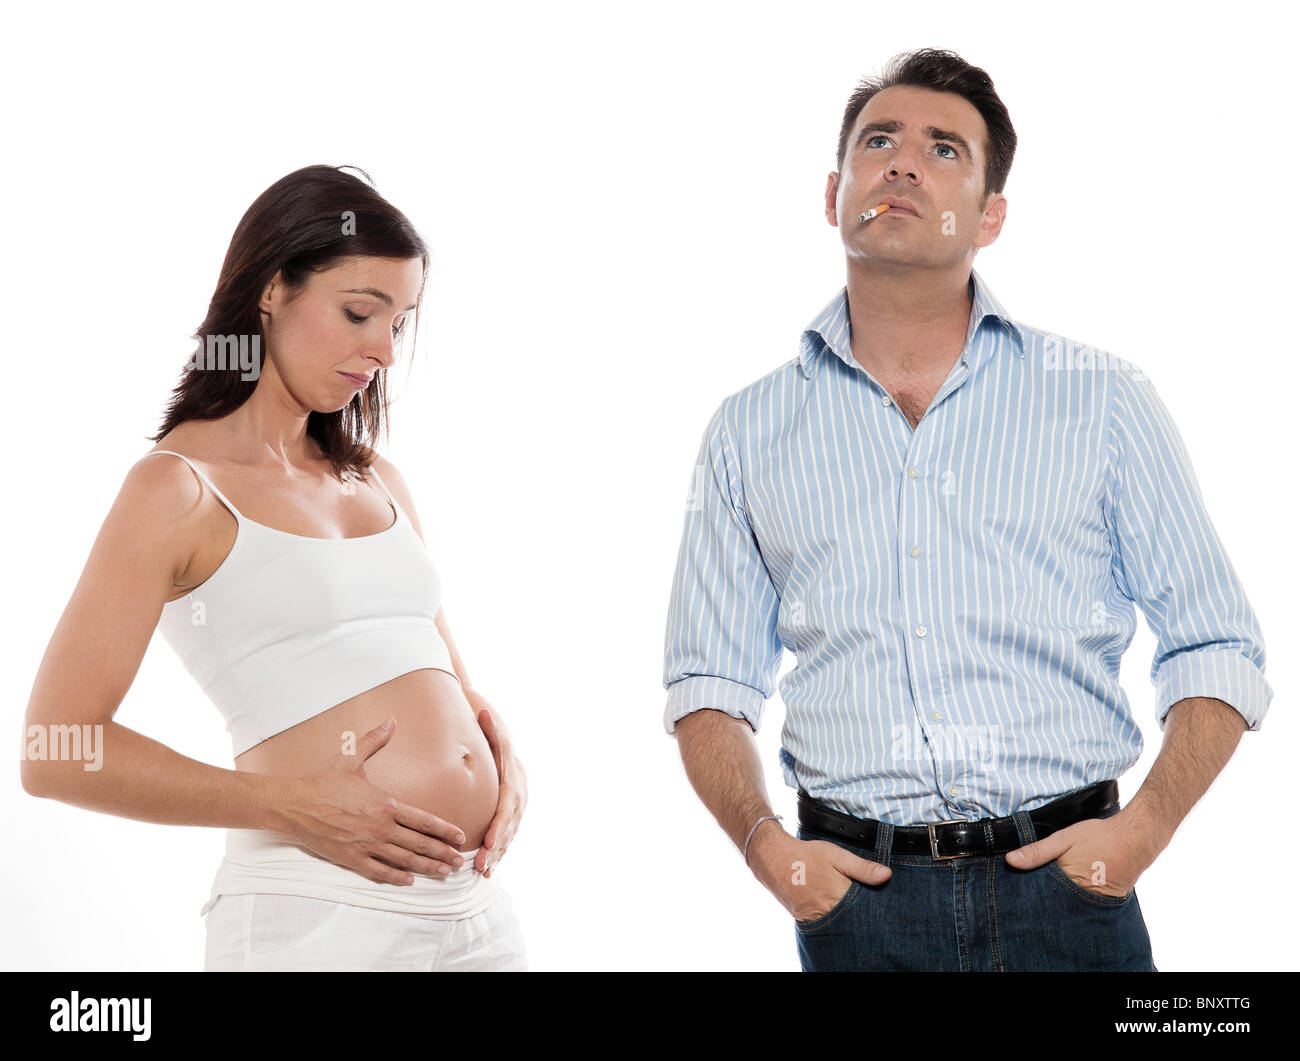 caucasian women smoking danger during pregnancy concept isolated studio on white background Stock Photo